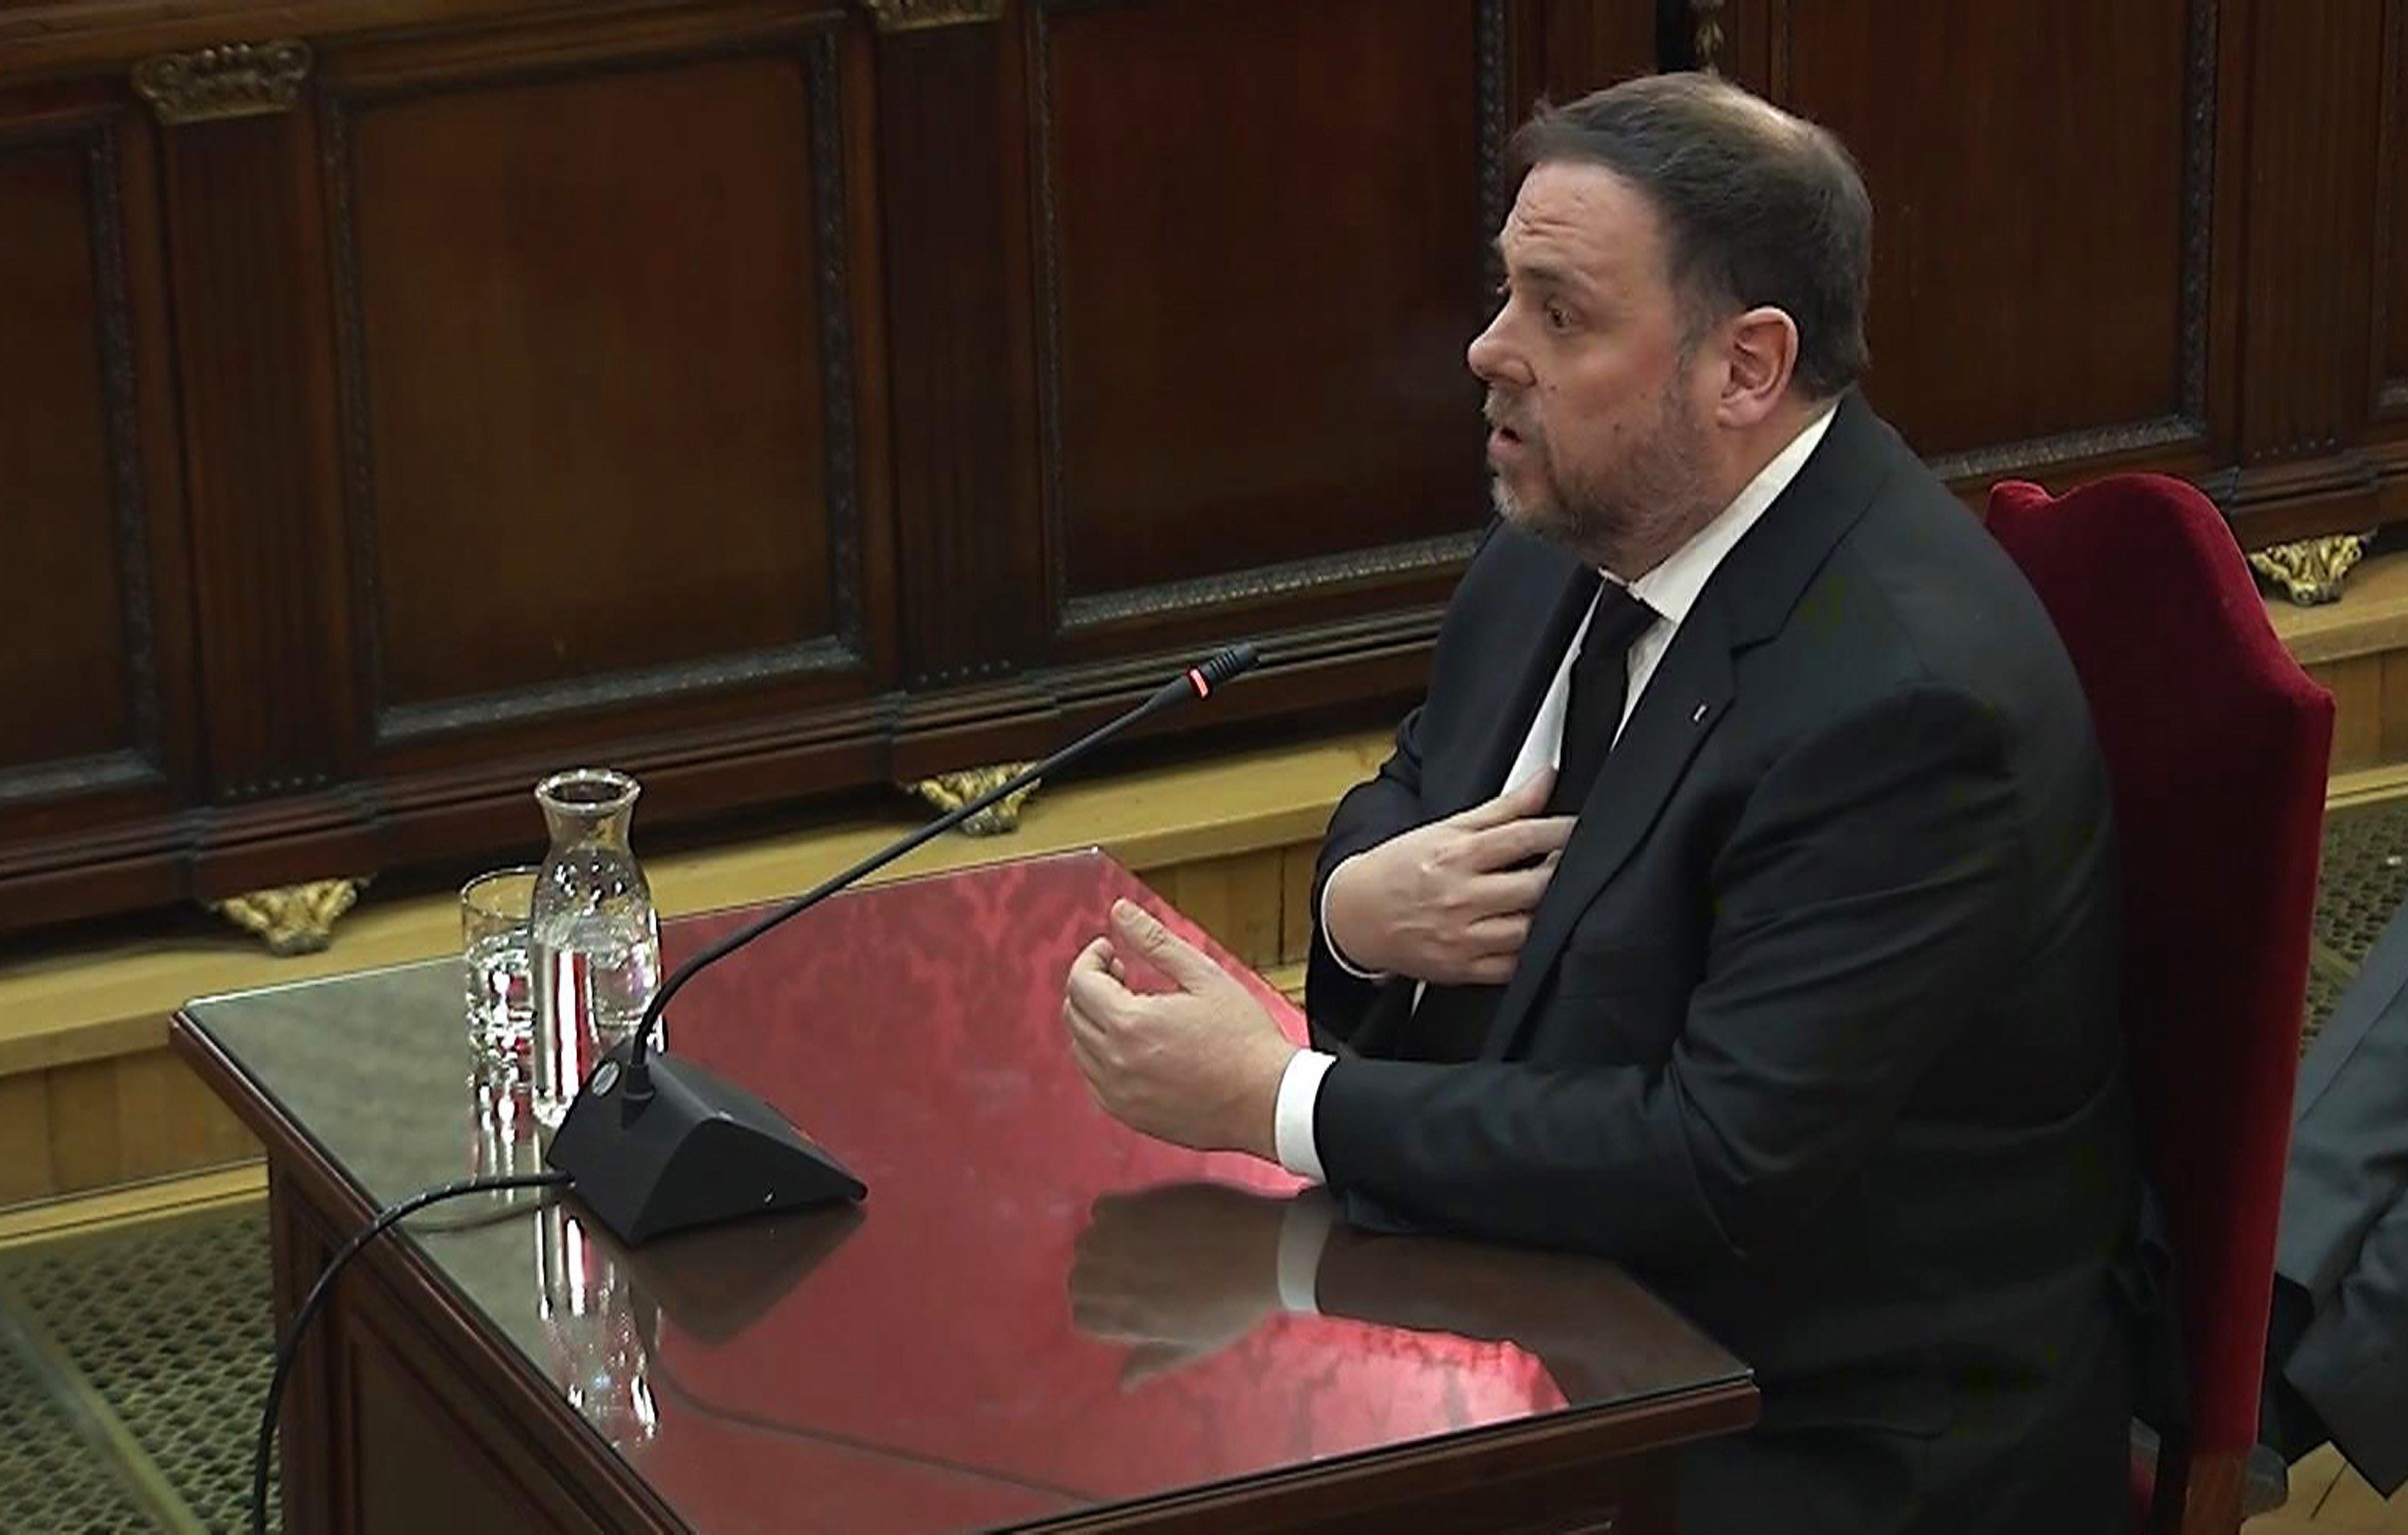 Imprisoned Oriol Junqueras to be EFA's candidate for European Commission President